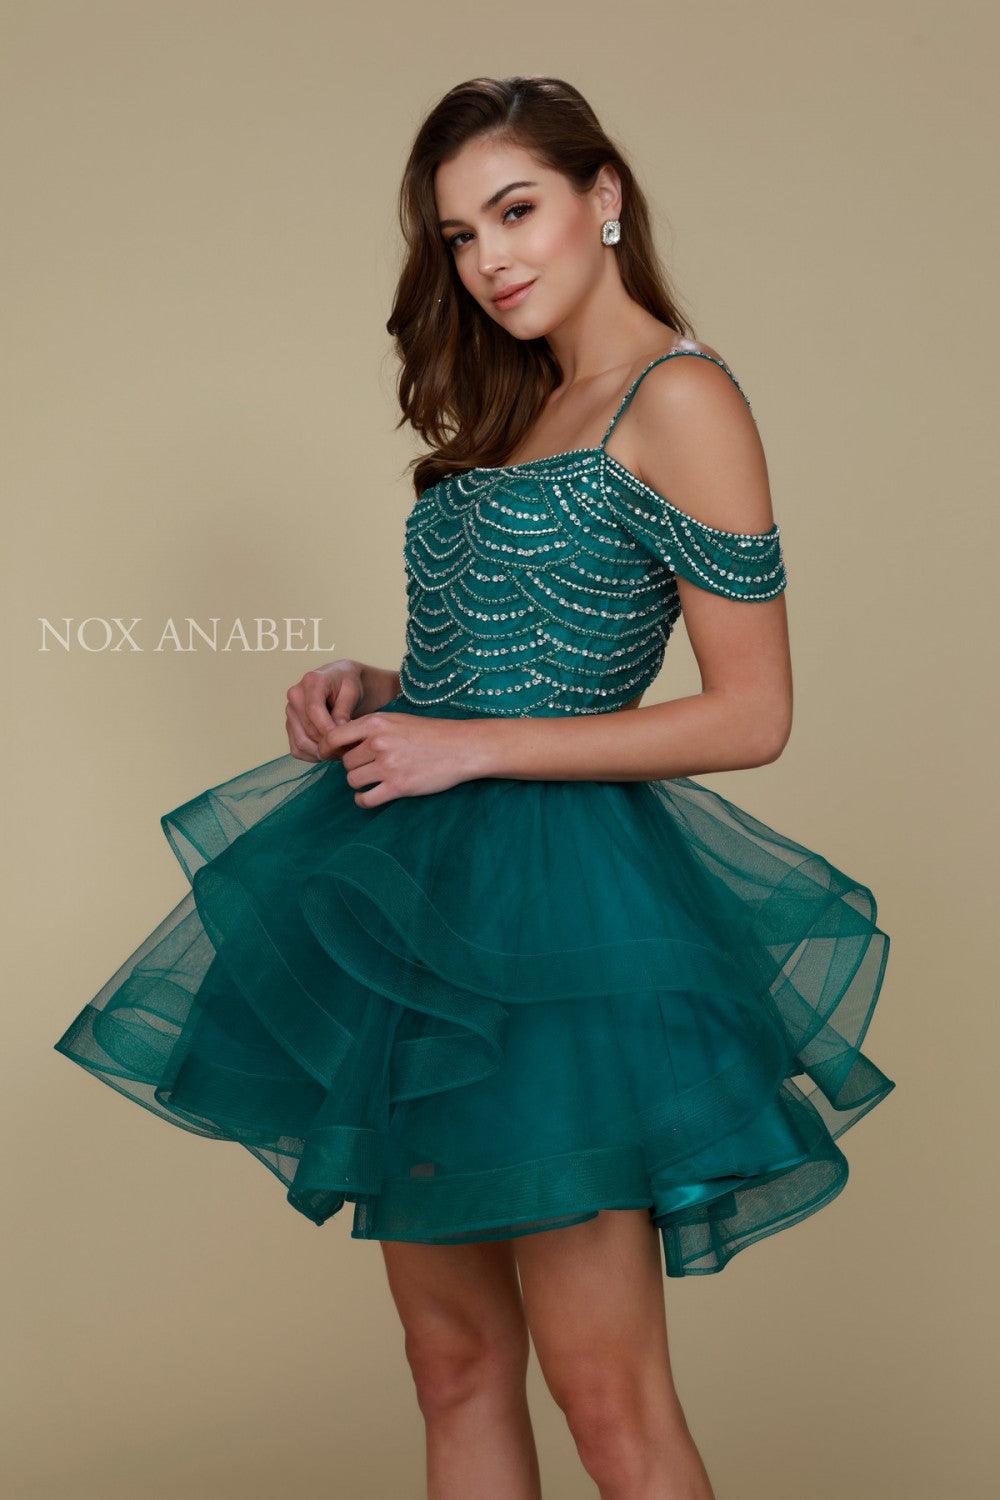 Short Off The Shoulder Prom Homecoming Dress - The Dress Outlet Nox Anabel